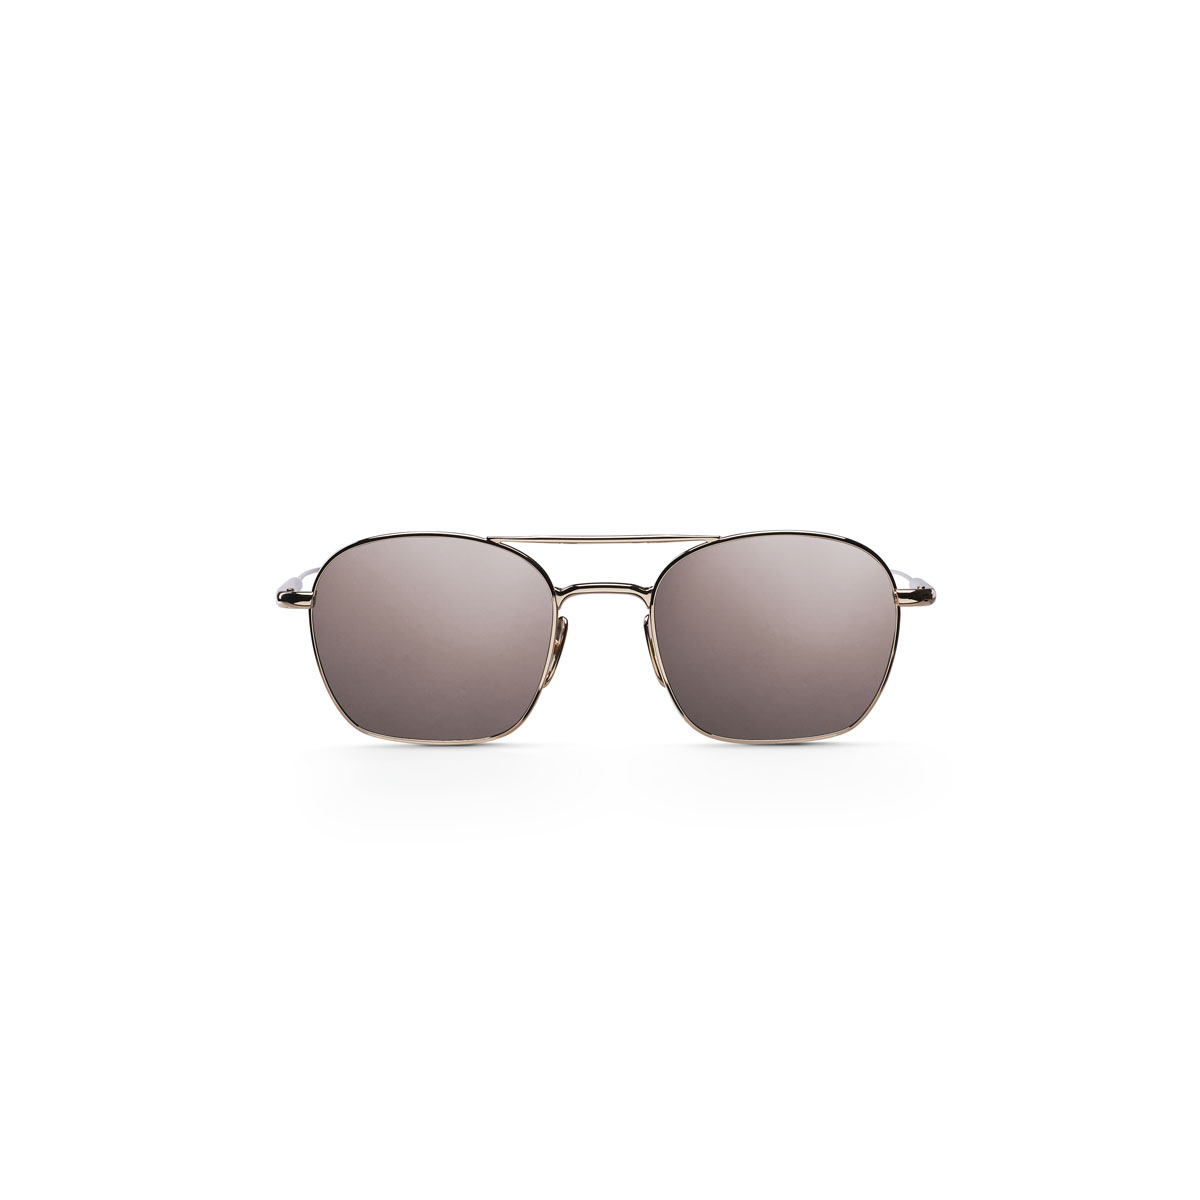 Byredo Byproduct Launches 3 Signature Sunglasses